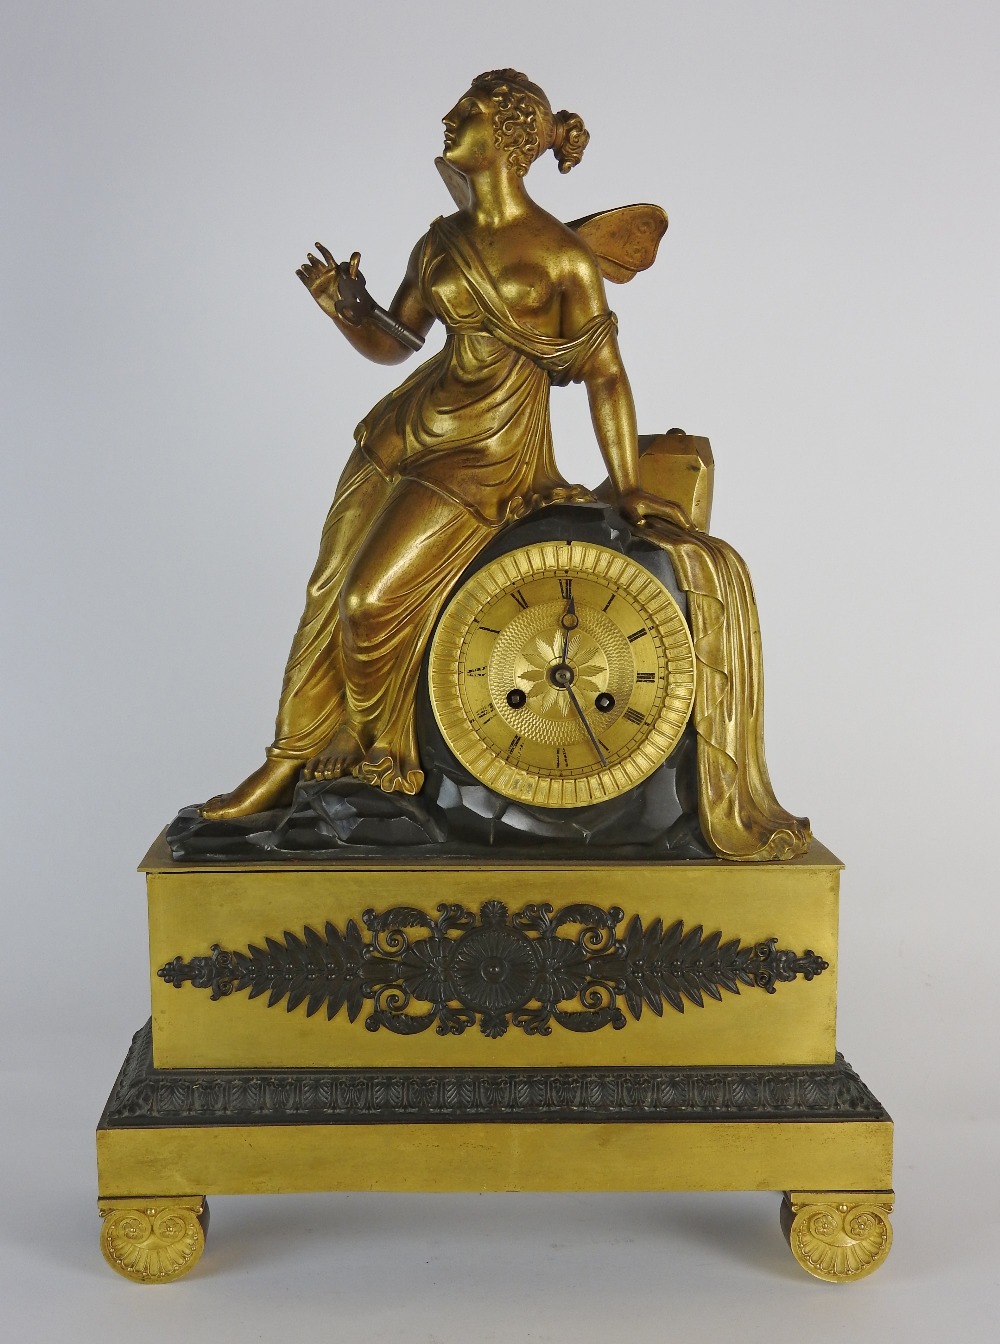 An early 19th century Empire style Ormolu figural mantle clock the 4 inch dial with ring of Roman